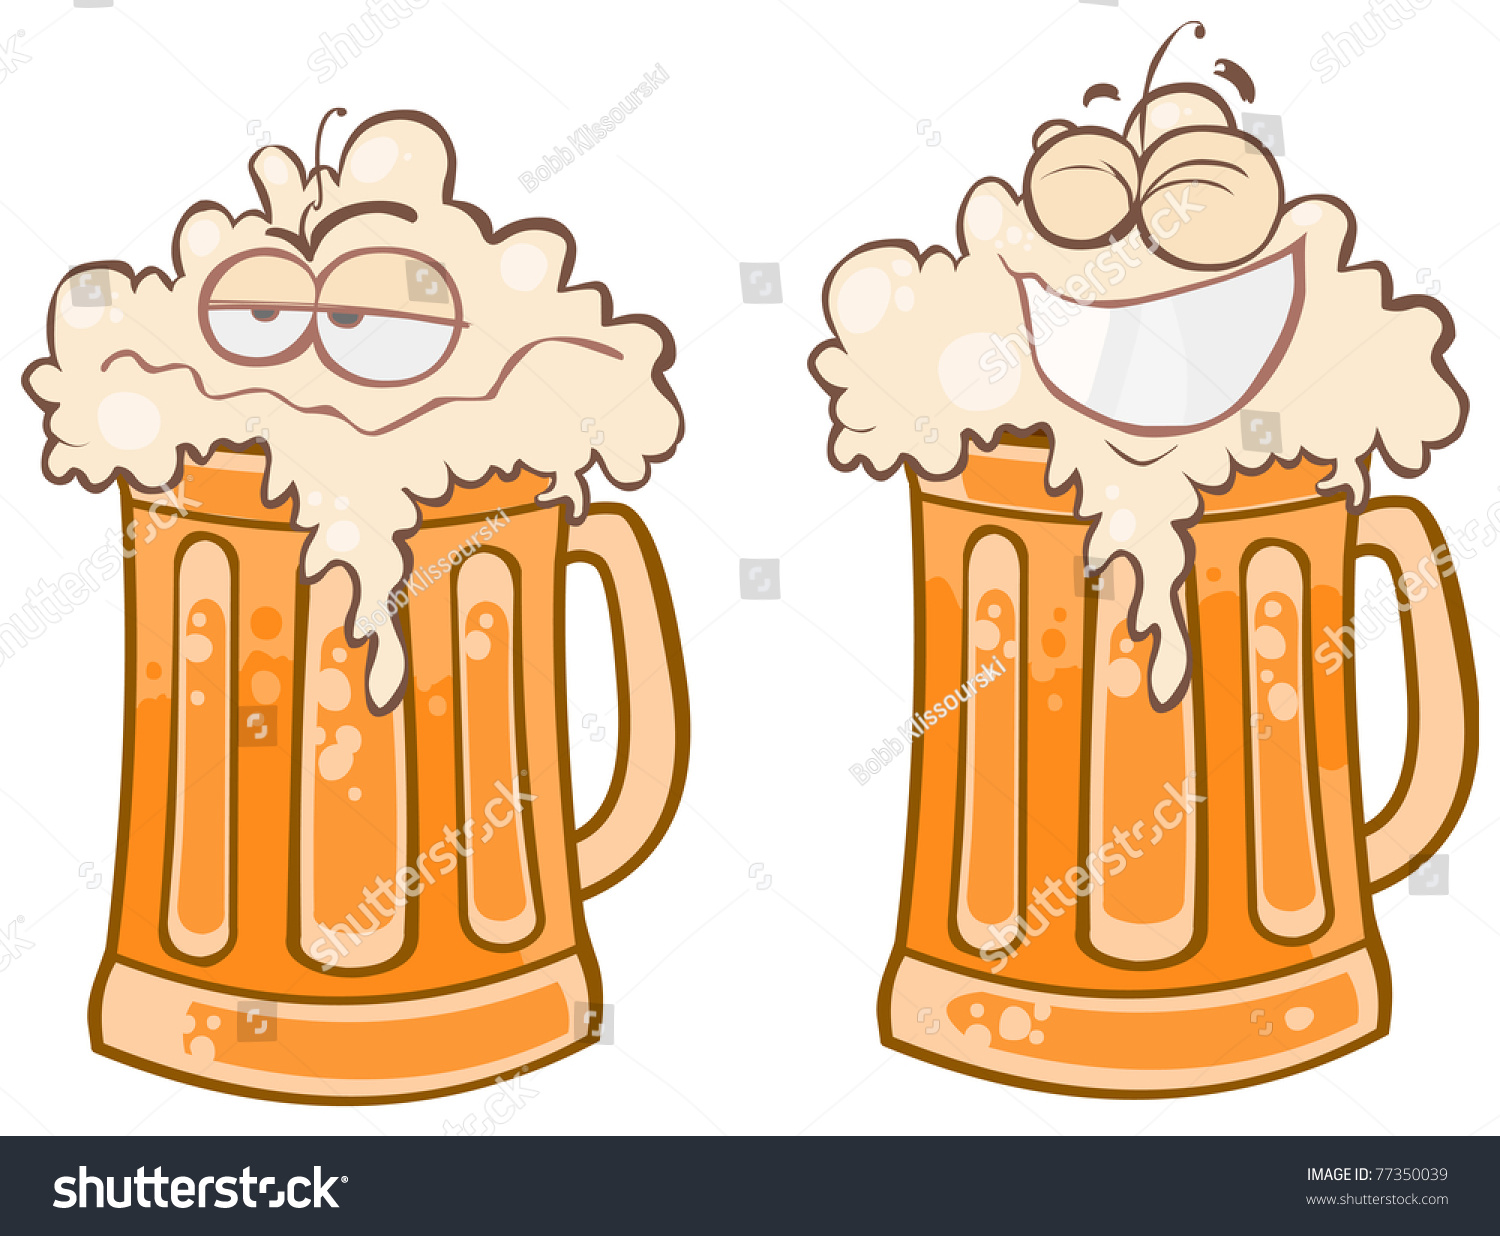 Two Funny Pint Of Beer. Stock Vector Illustration 77350039 : Shutterstock